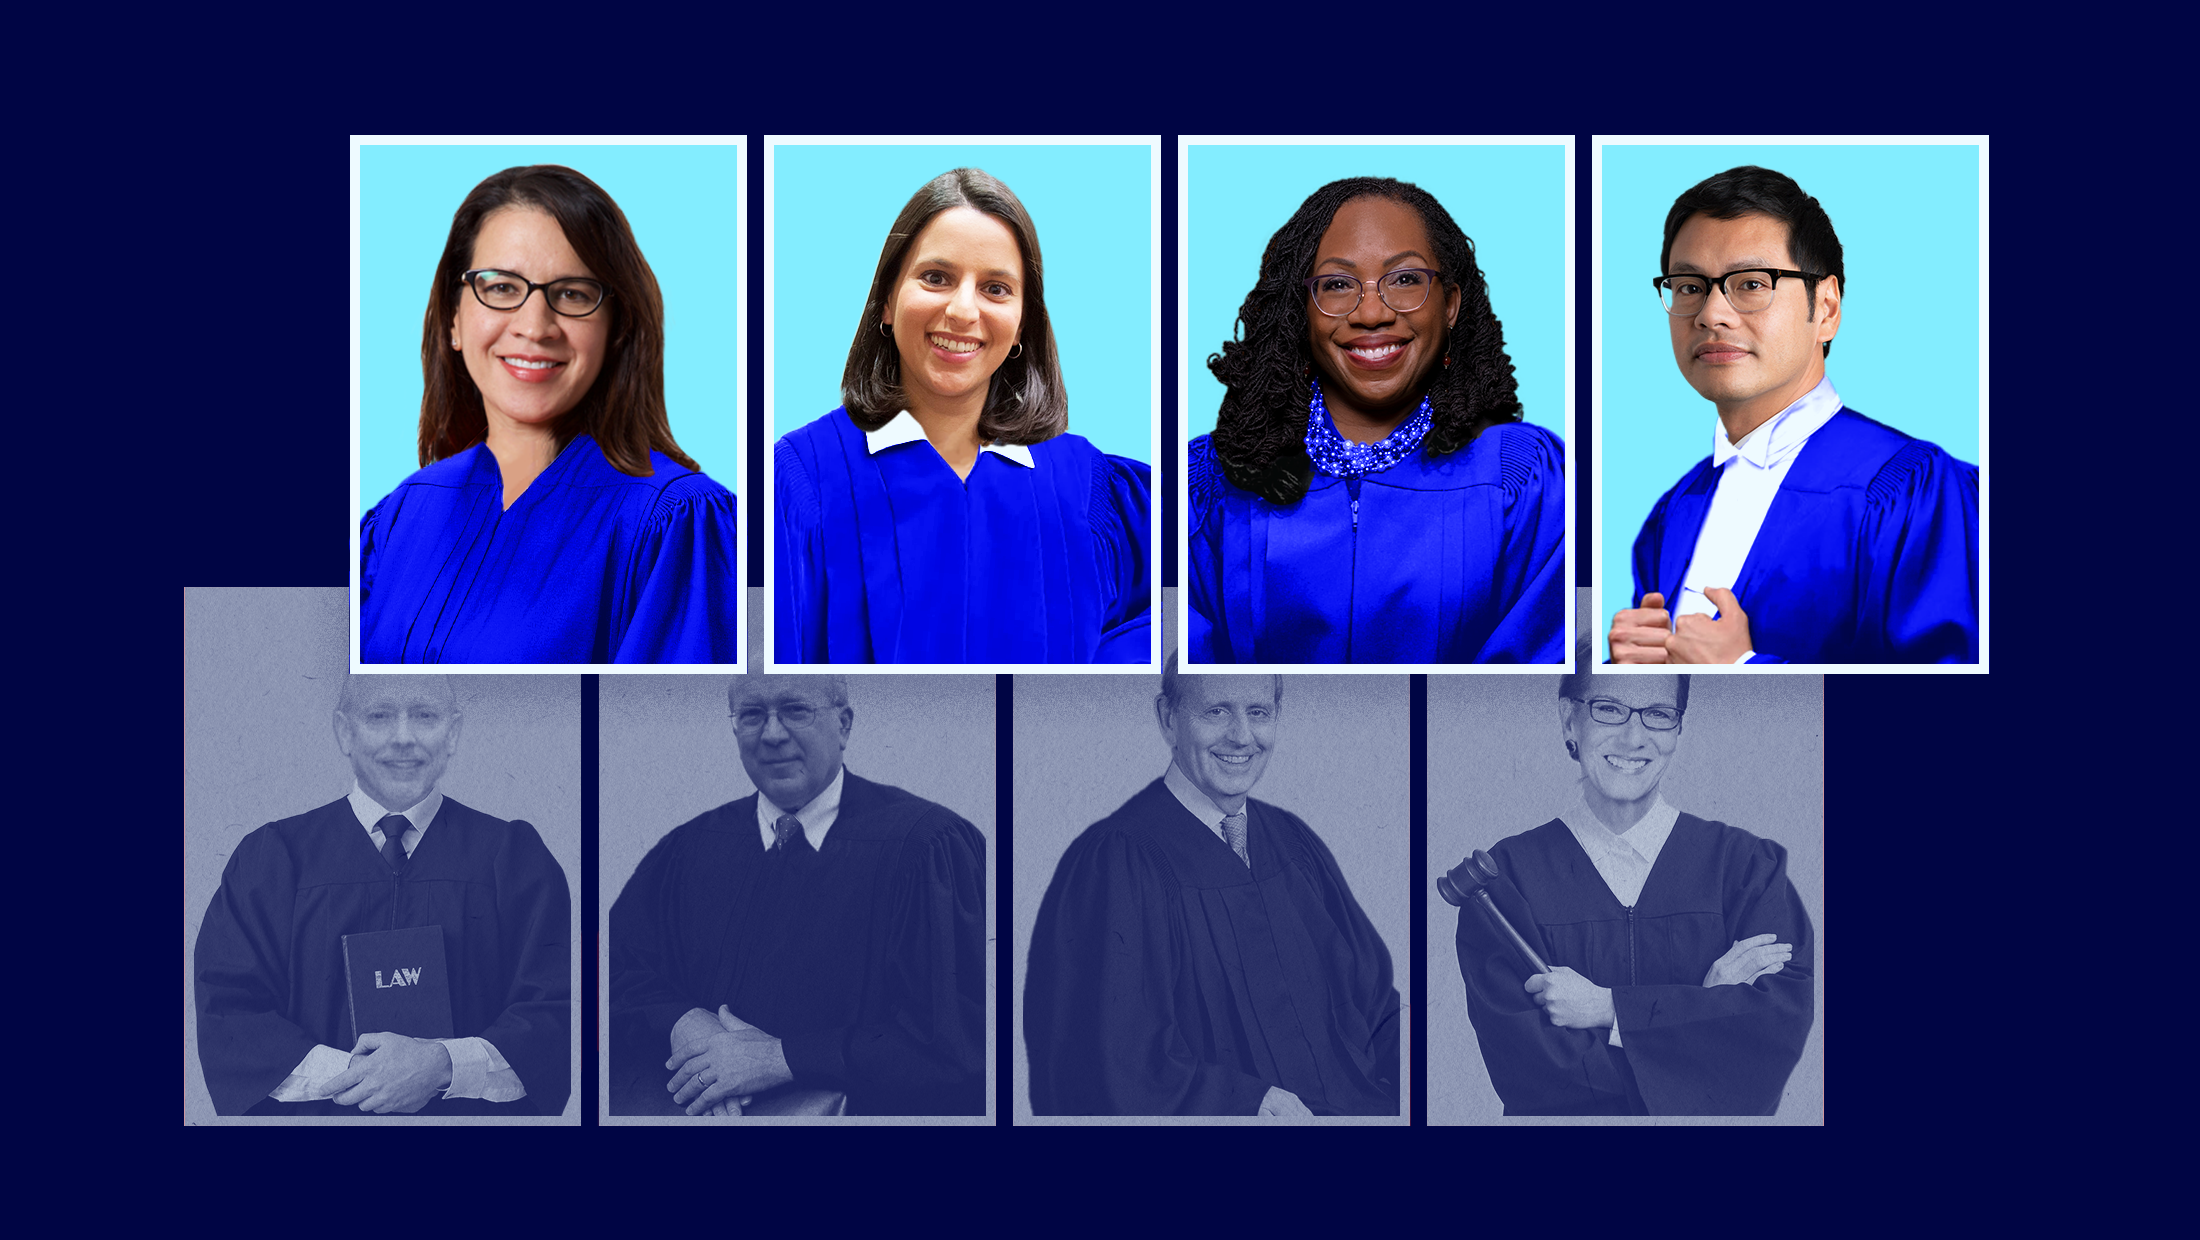 Dark blue background with four faded images of white judges behind four colorful images of four judges/justices from left to right: Judge Nancy Maldonado, Judge Loren AliKhan, Supreme Court Justice Ketanji Brown Jackson and Judge Dale Ho.